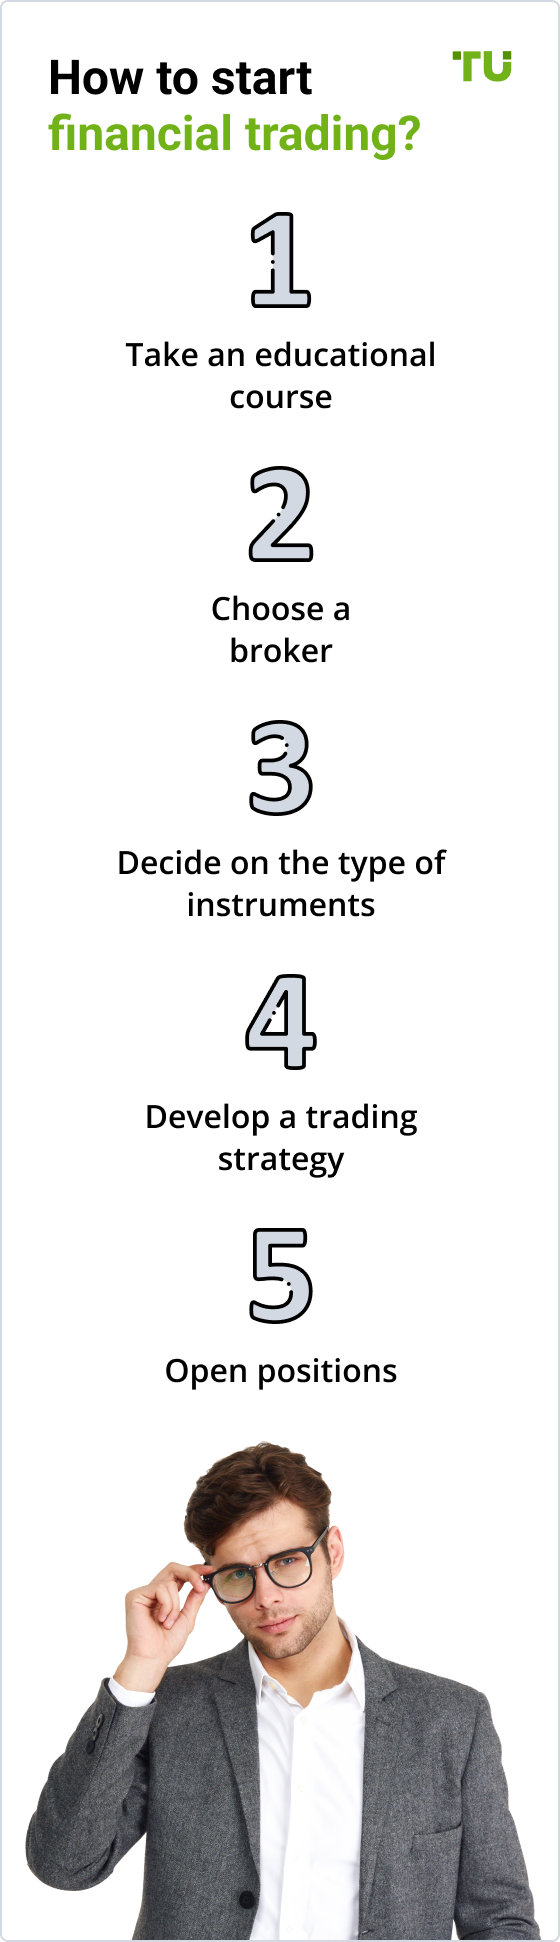 How to start financial trading?